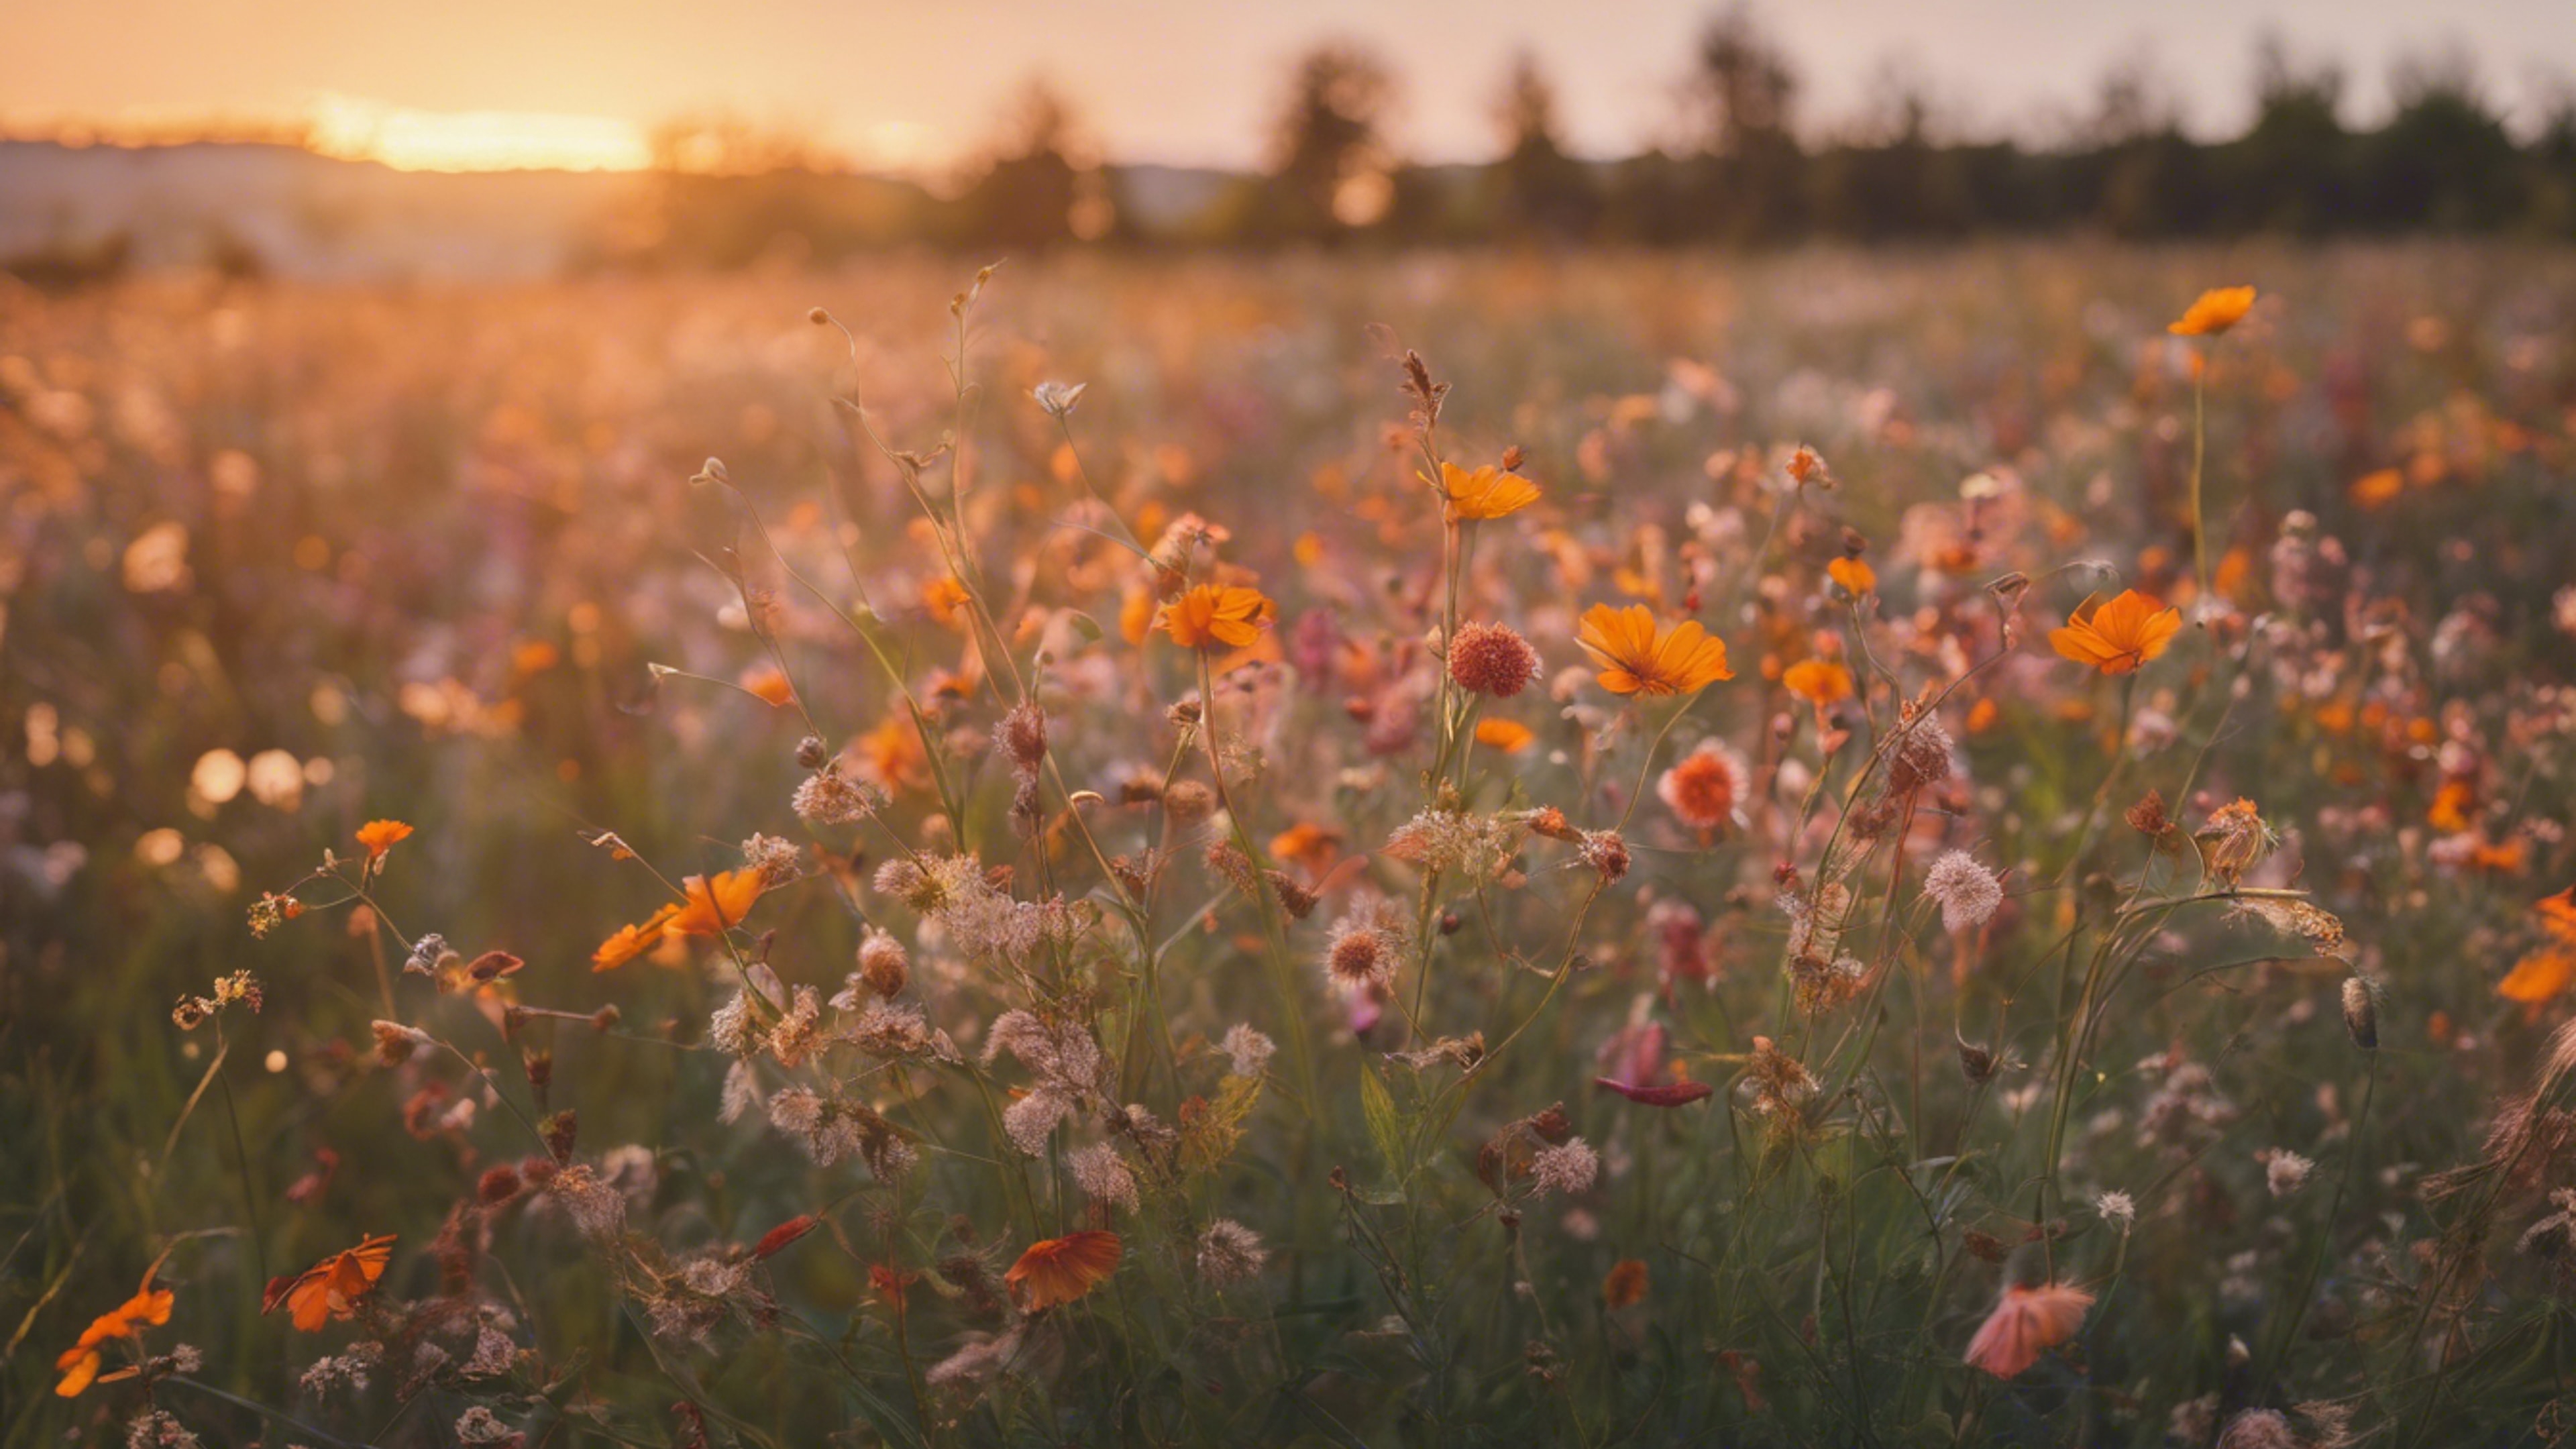 A nostalgic field of wildflowers in sunset hues. Ταπετσαρία[1a5d684a5d8746a6914f]